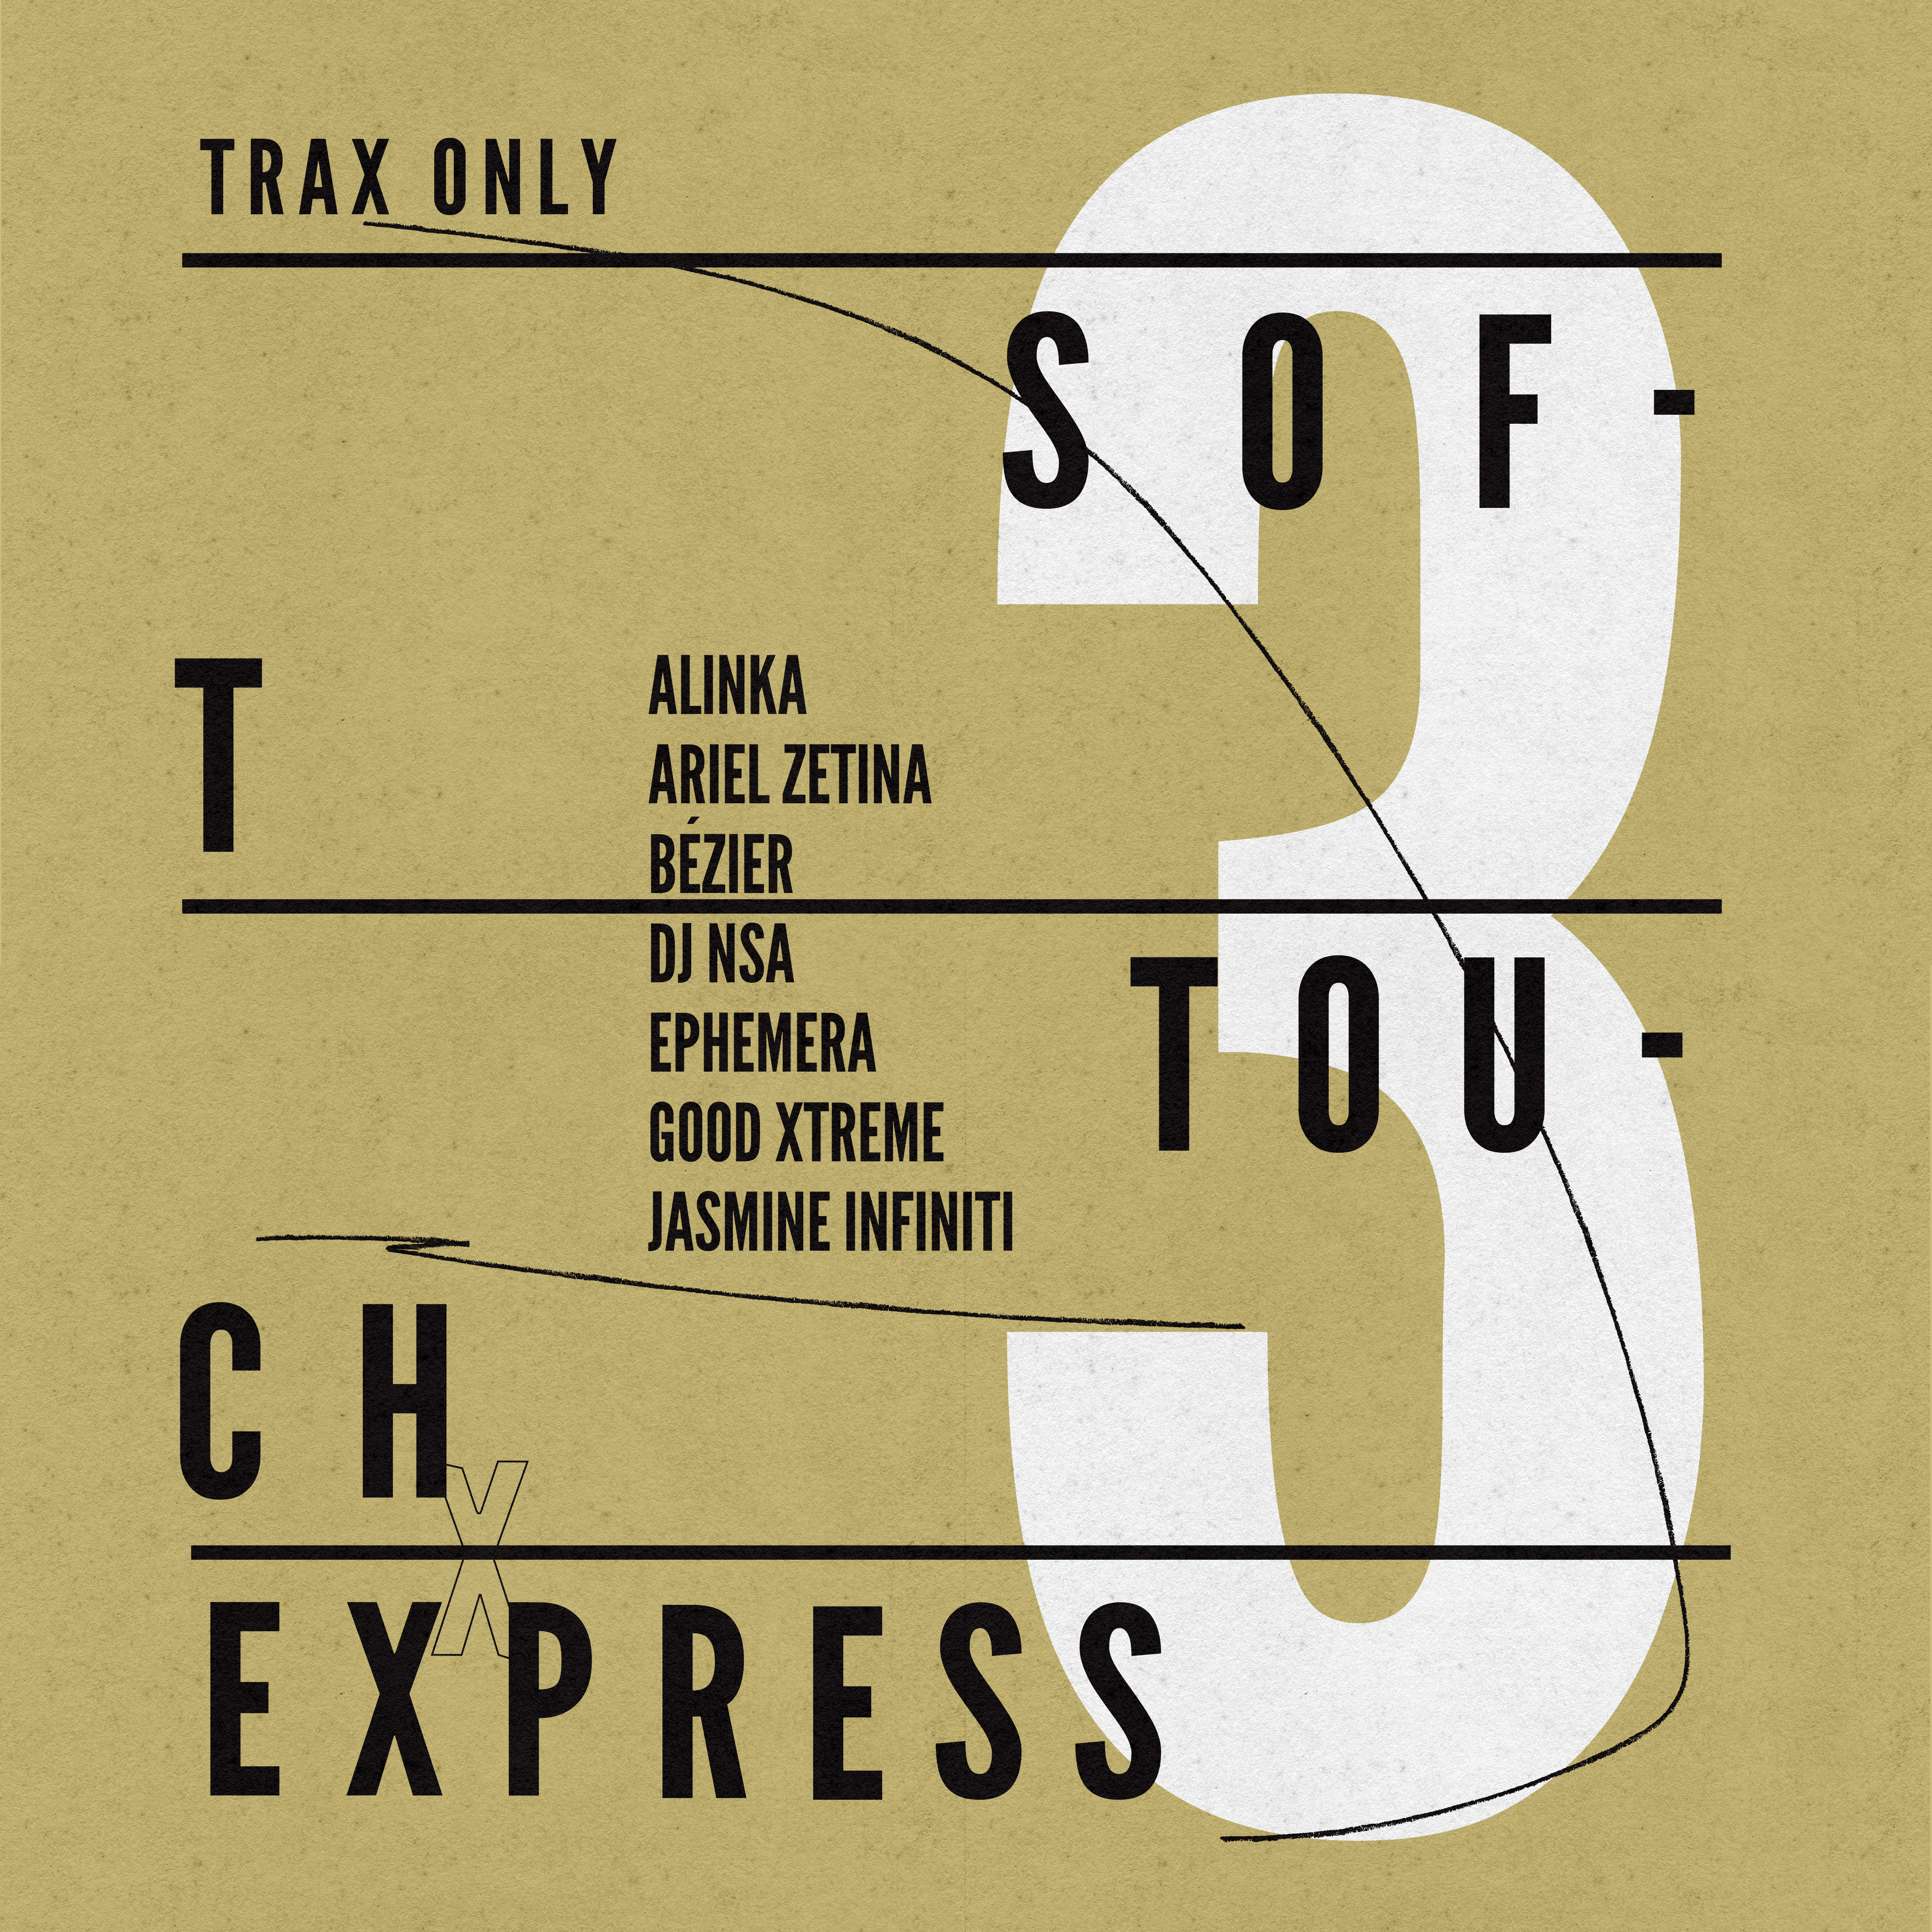 Album image for the Soft Touch Express Compilation by Trax Only